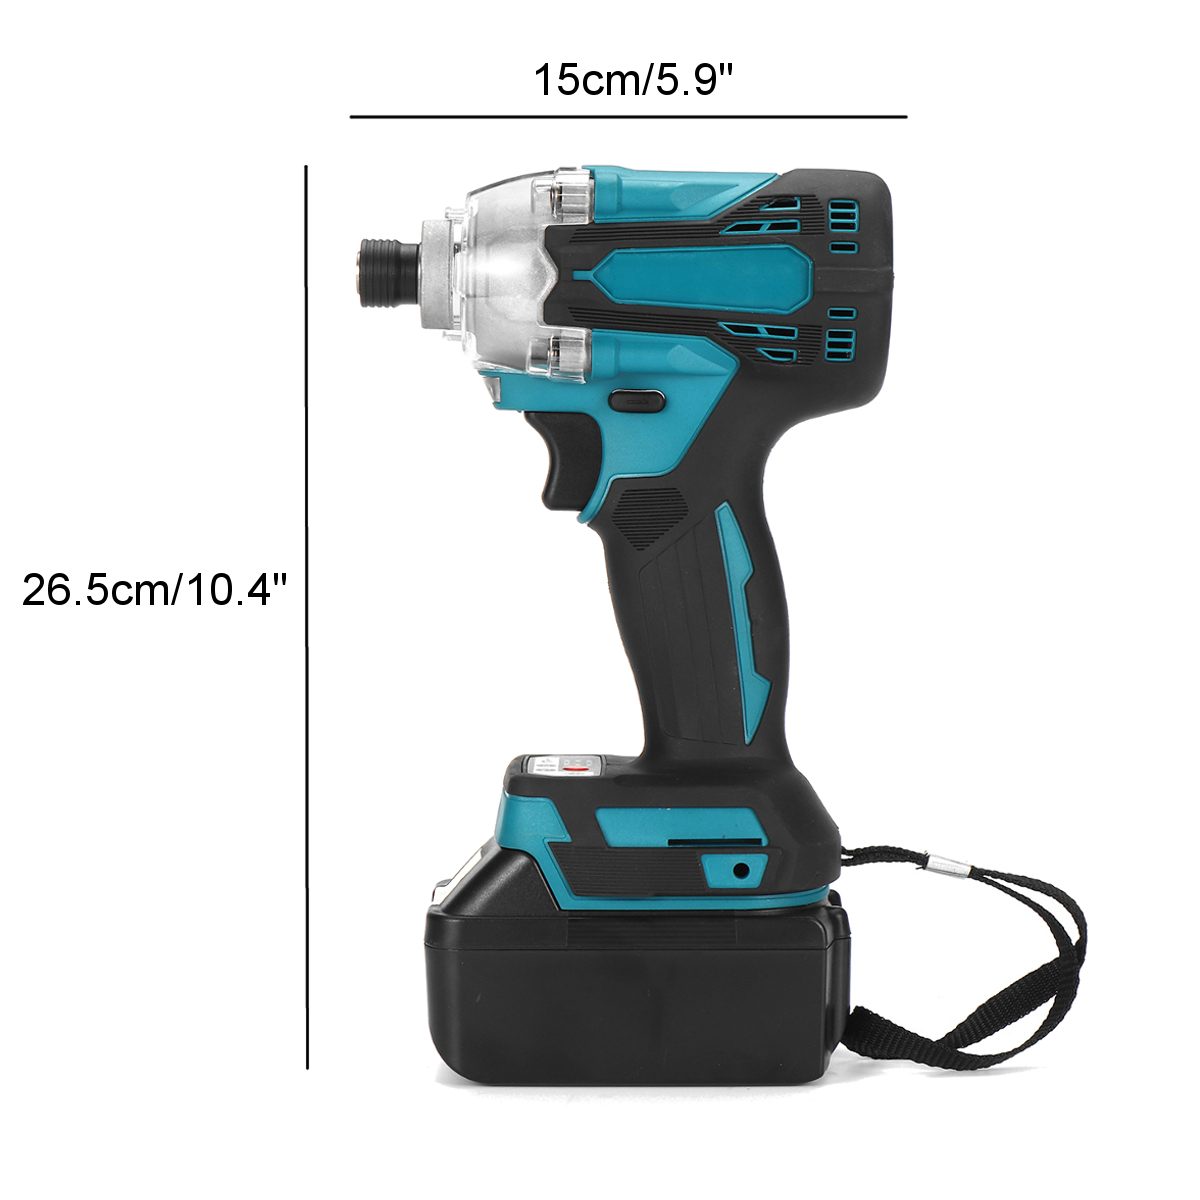 350NM-18V-Brushless-Cordless-Electric-Impact-Wrench-Driver-Screwdriver-Power-Tools-W-None12-Battery--1878641-9